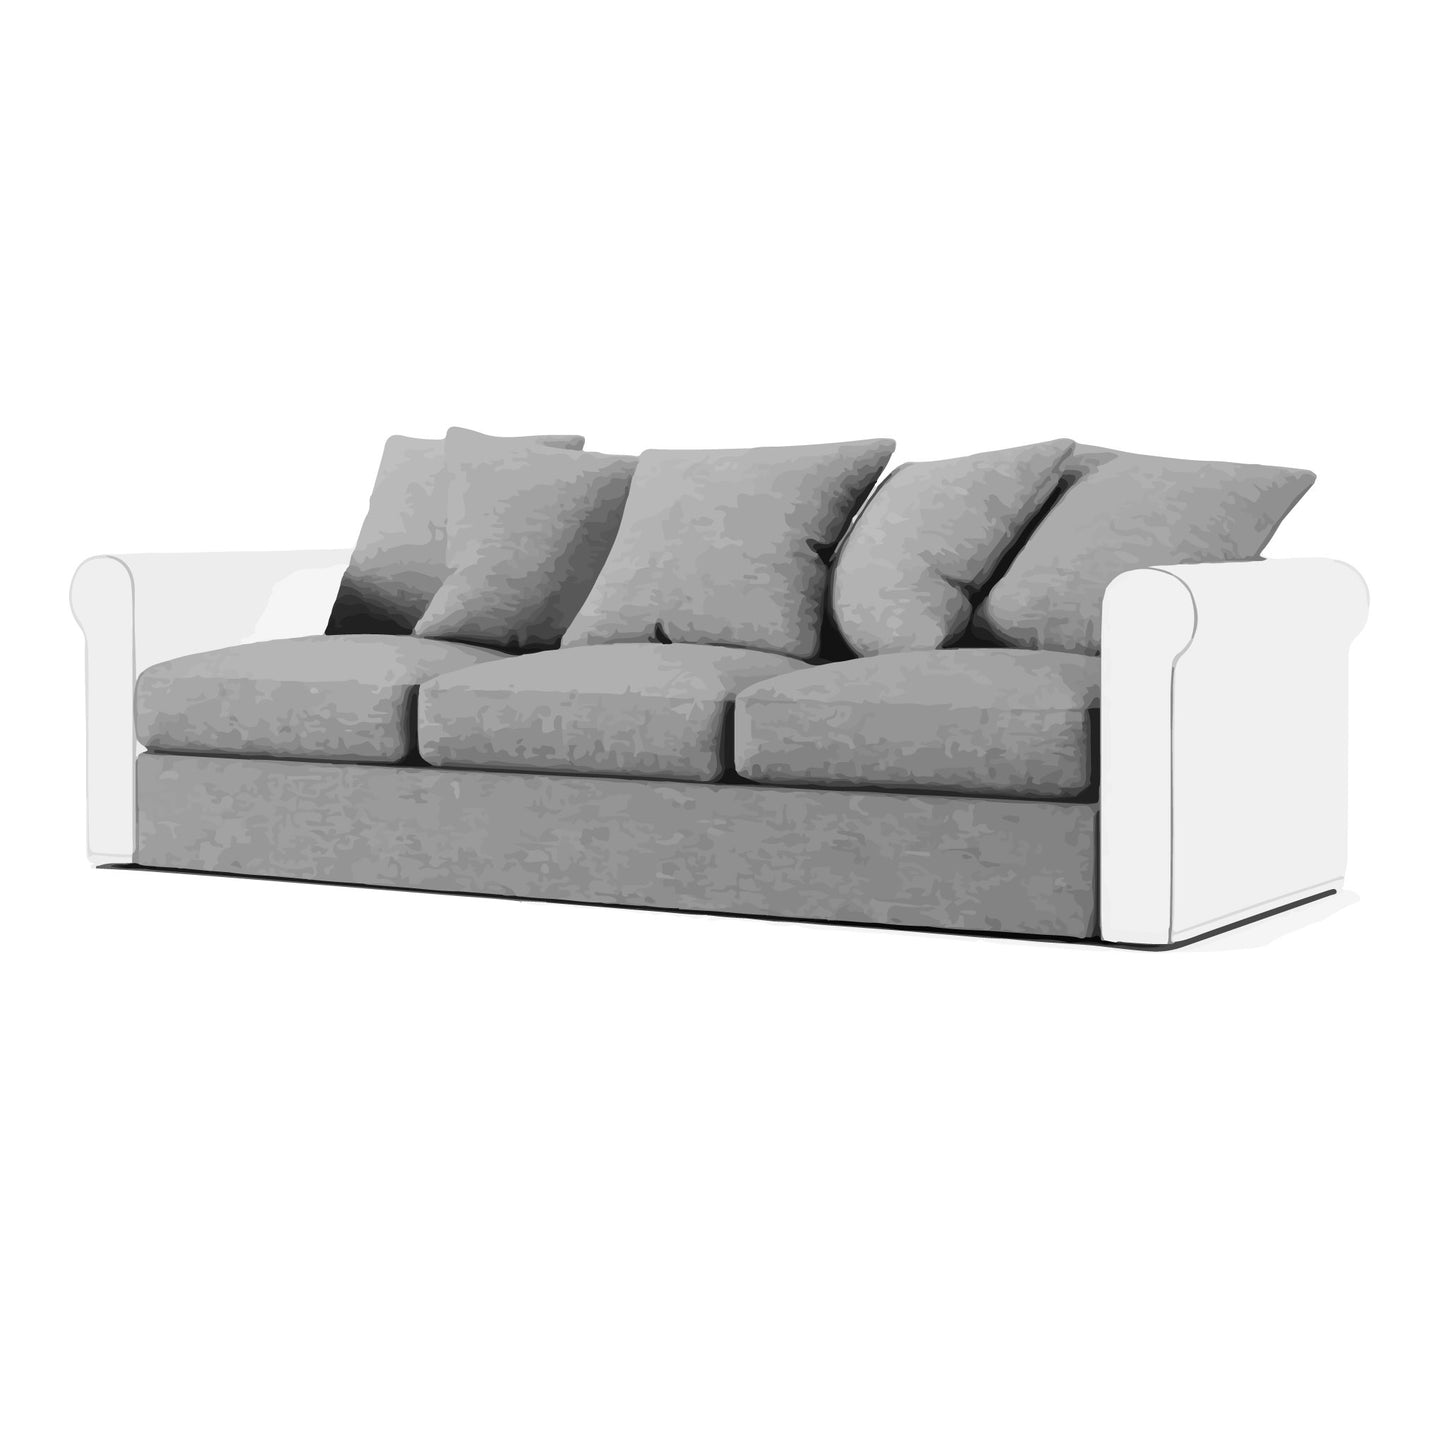 Gronlid 3 Seater Sofa Section Cover